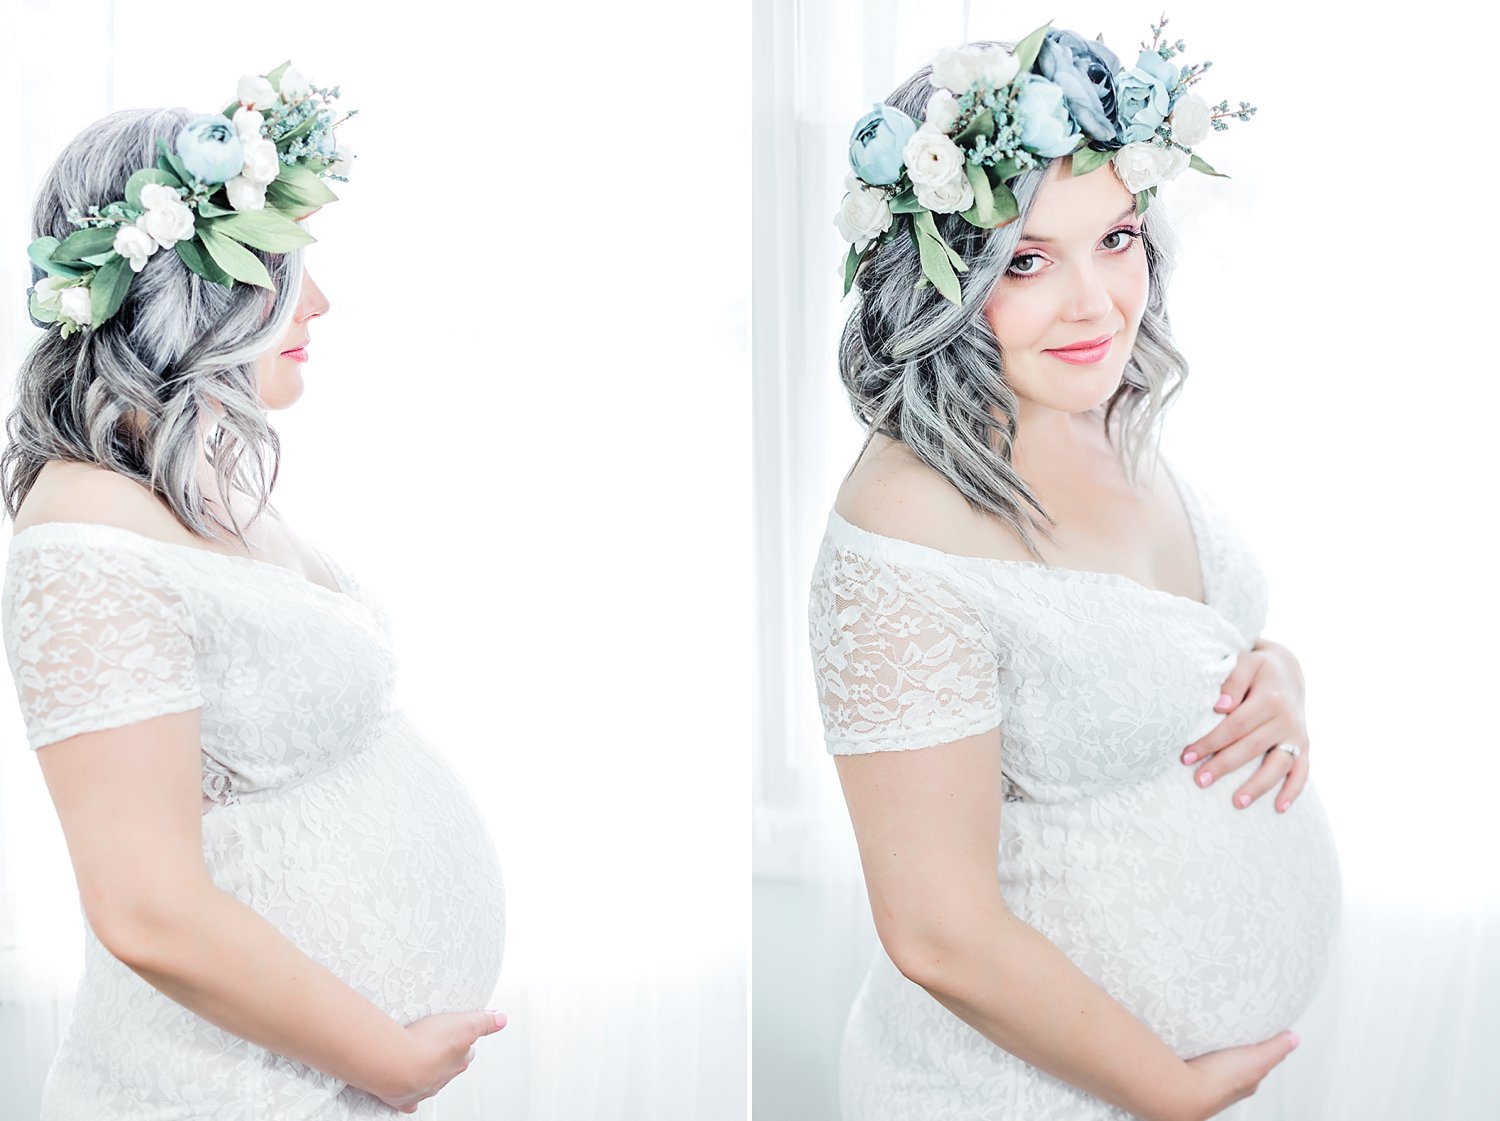 a side by side comparison photo of mother's baby bump in modern studio portraits